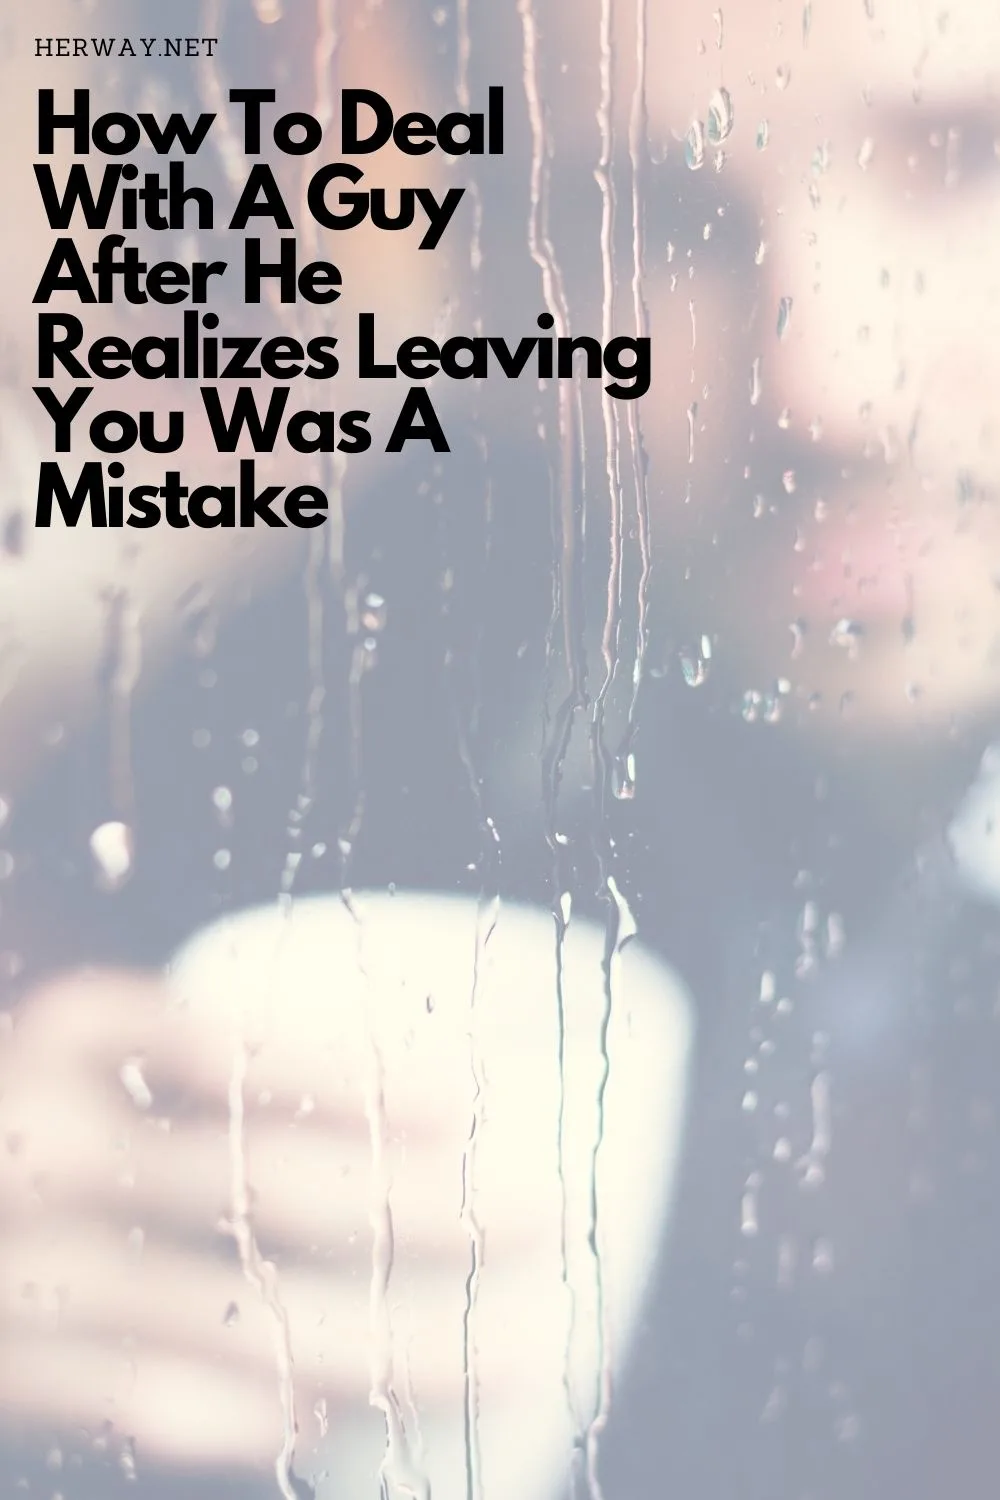 How To Deal With A Guy After He Realizes Leaving You Was A Mistake